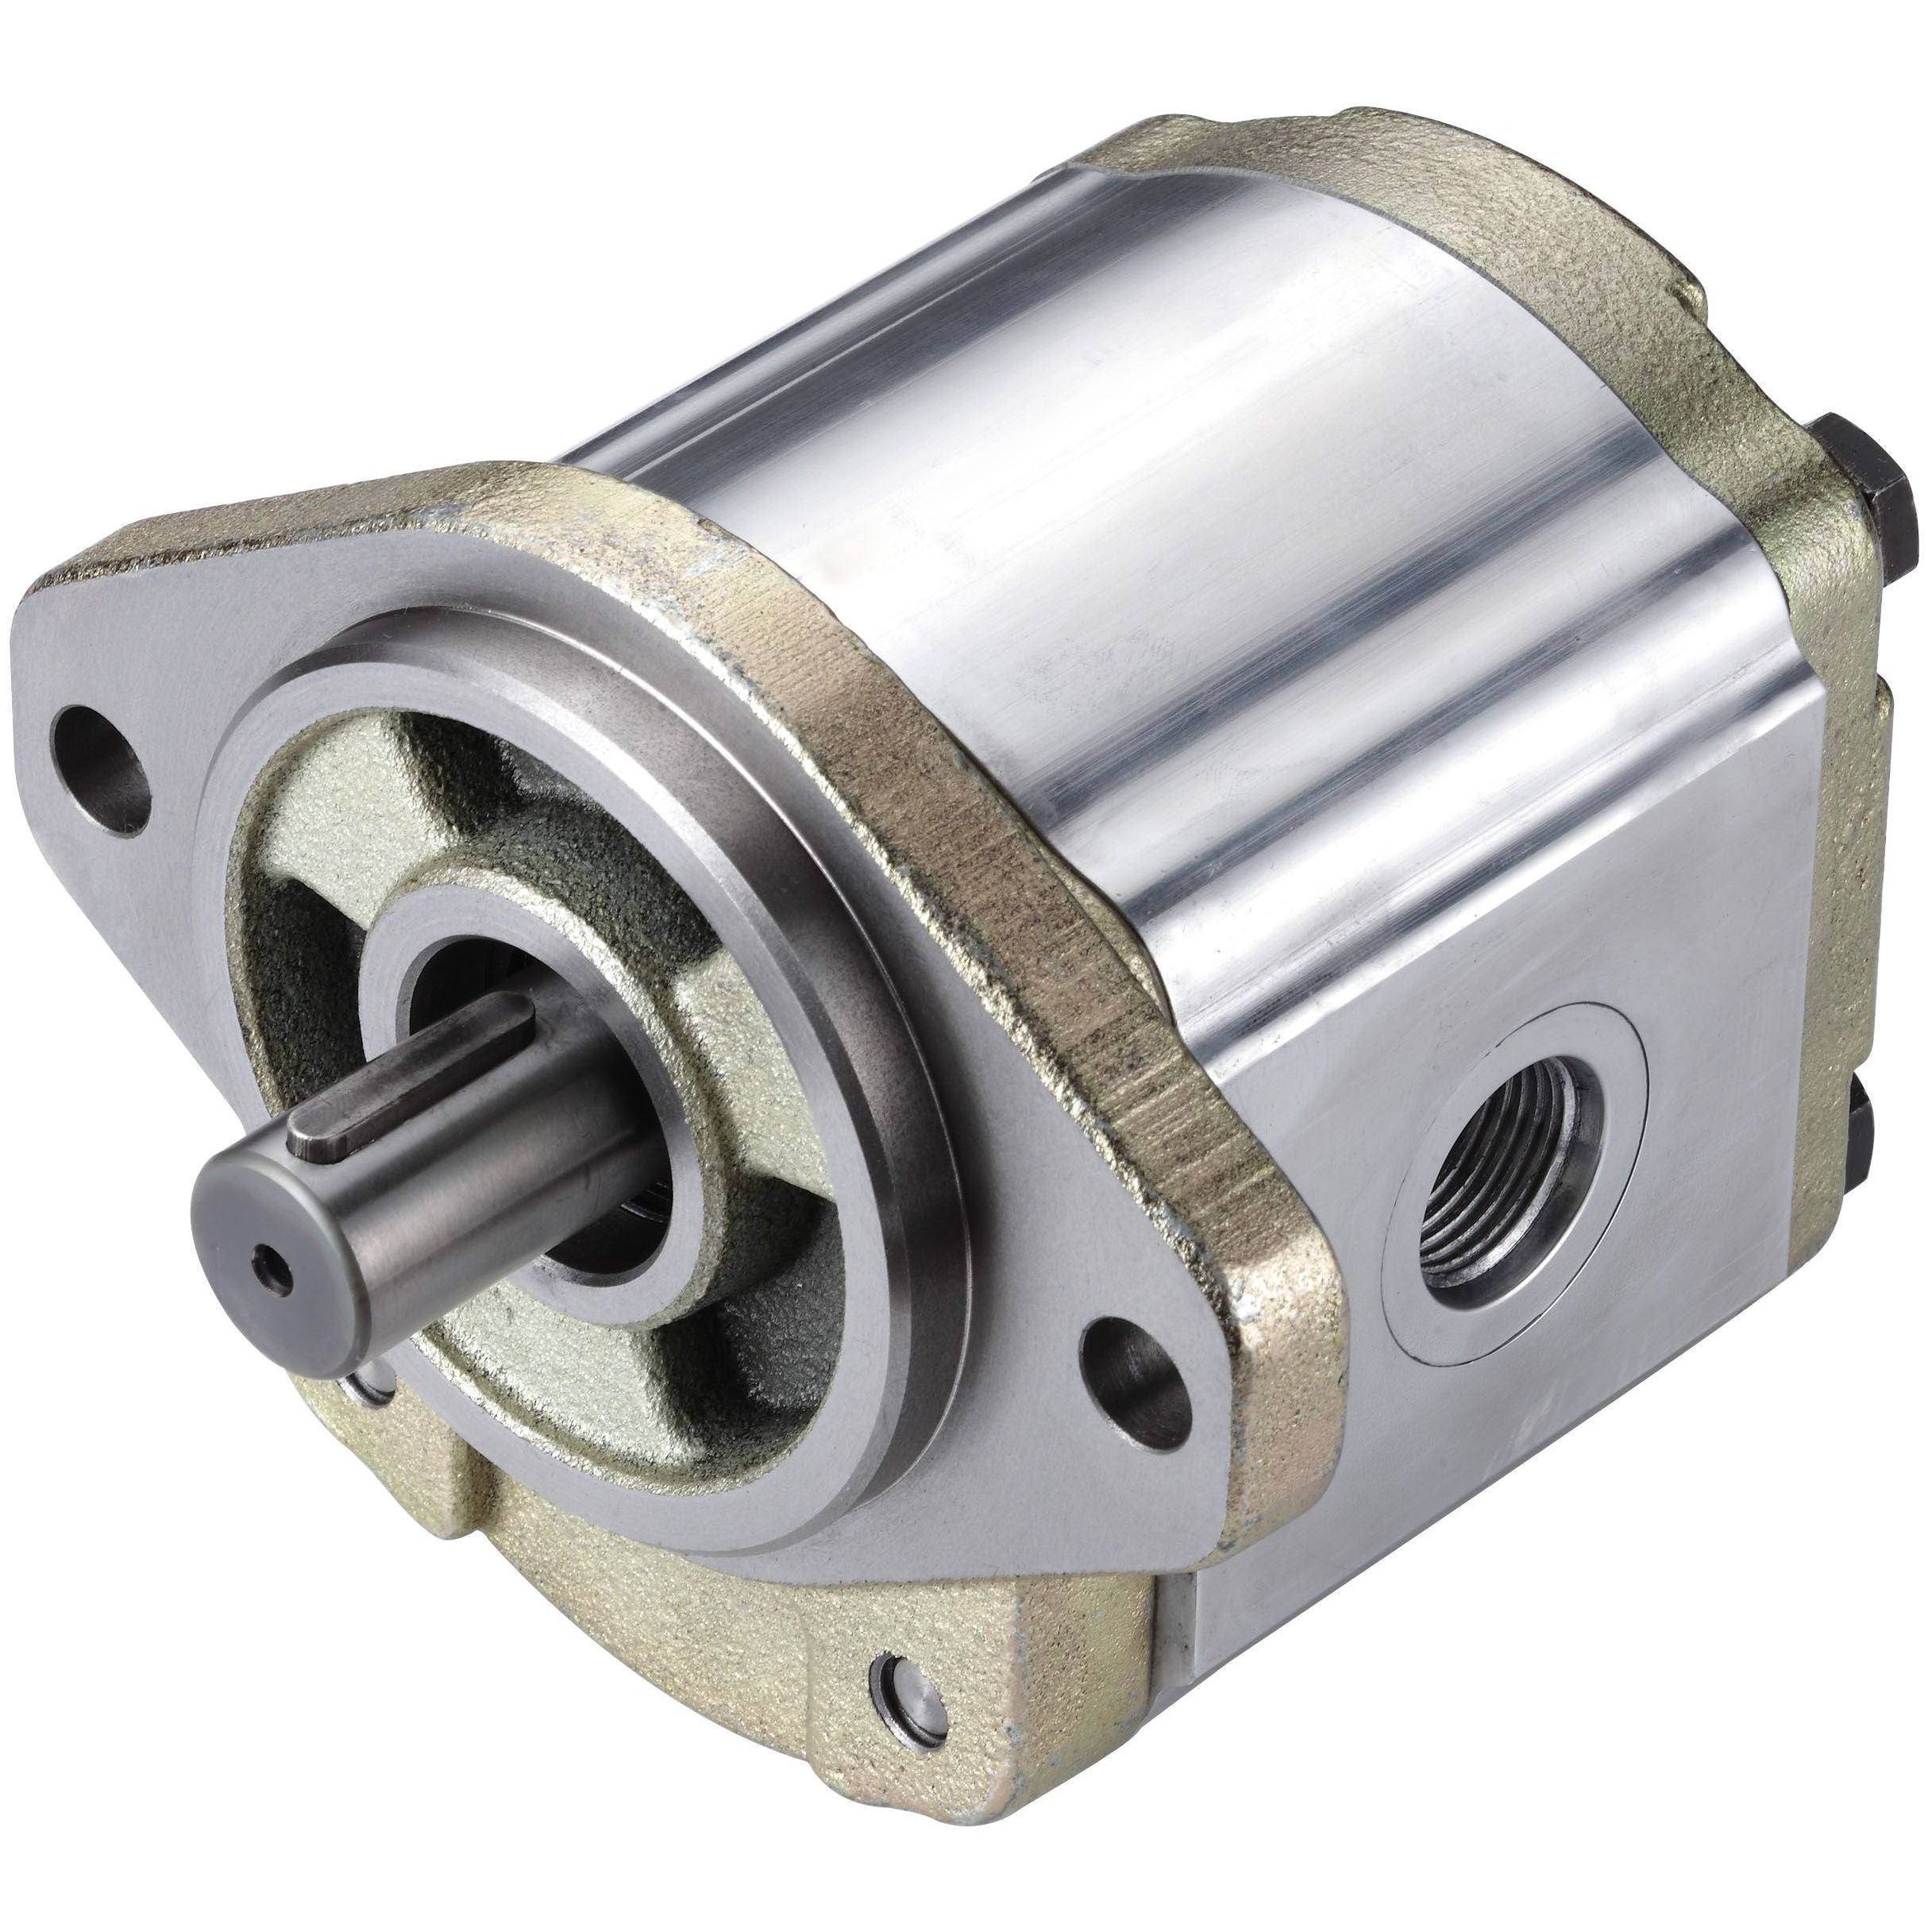 3GB8ZU252L : Honor Gear Pump, CCW Rotation, 52cc (3.17in3), 24.73 GPM, 2800psi, 2500 RPM, #20 SAE (1.25") In, #12 SAE (3/4") Out, Splined Shaft 13-Tooth, 16/32 Pitch, SAE B 2-Bolt Mount